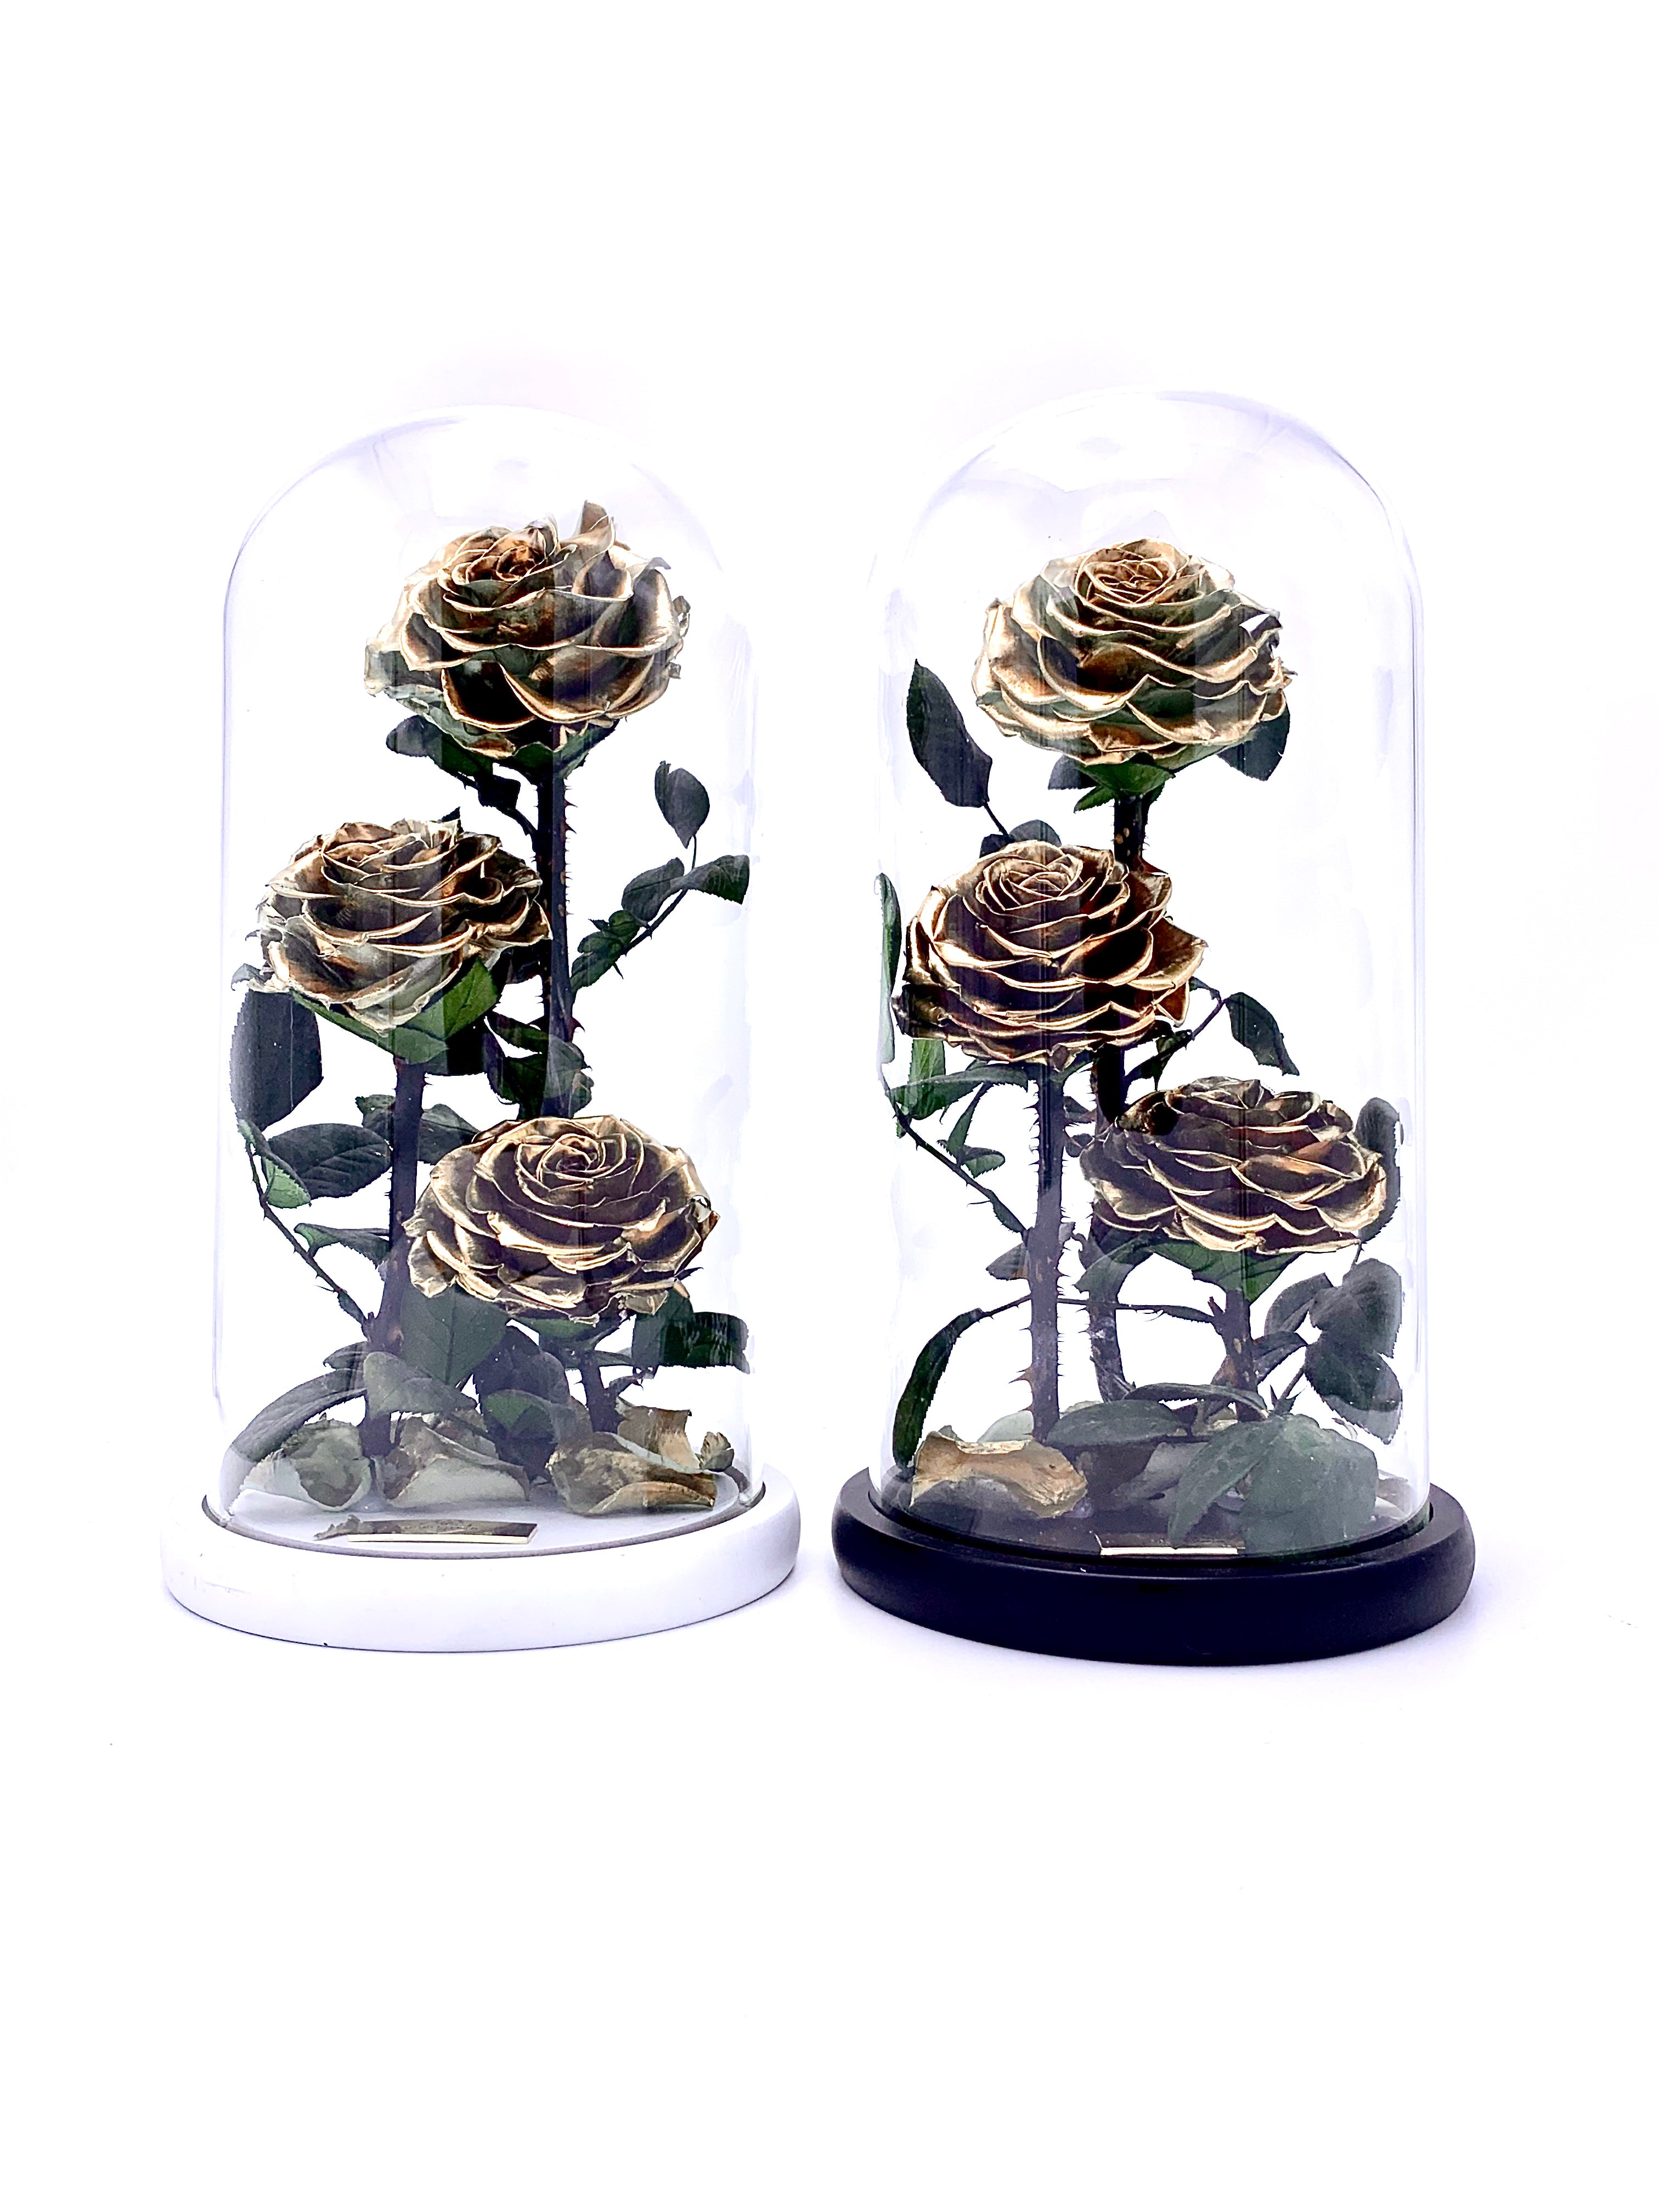 Eternity 3-in-1 Rose in Enchanted Glass Dome